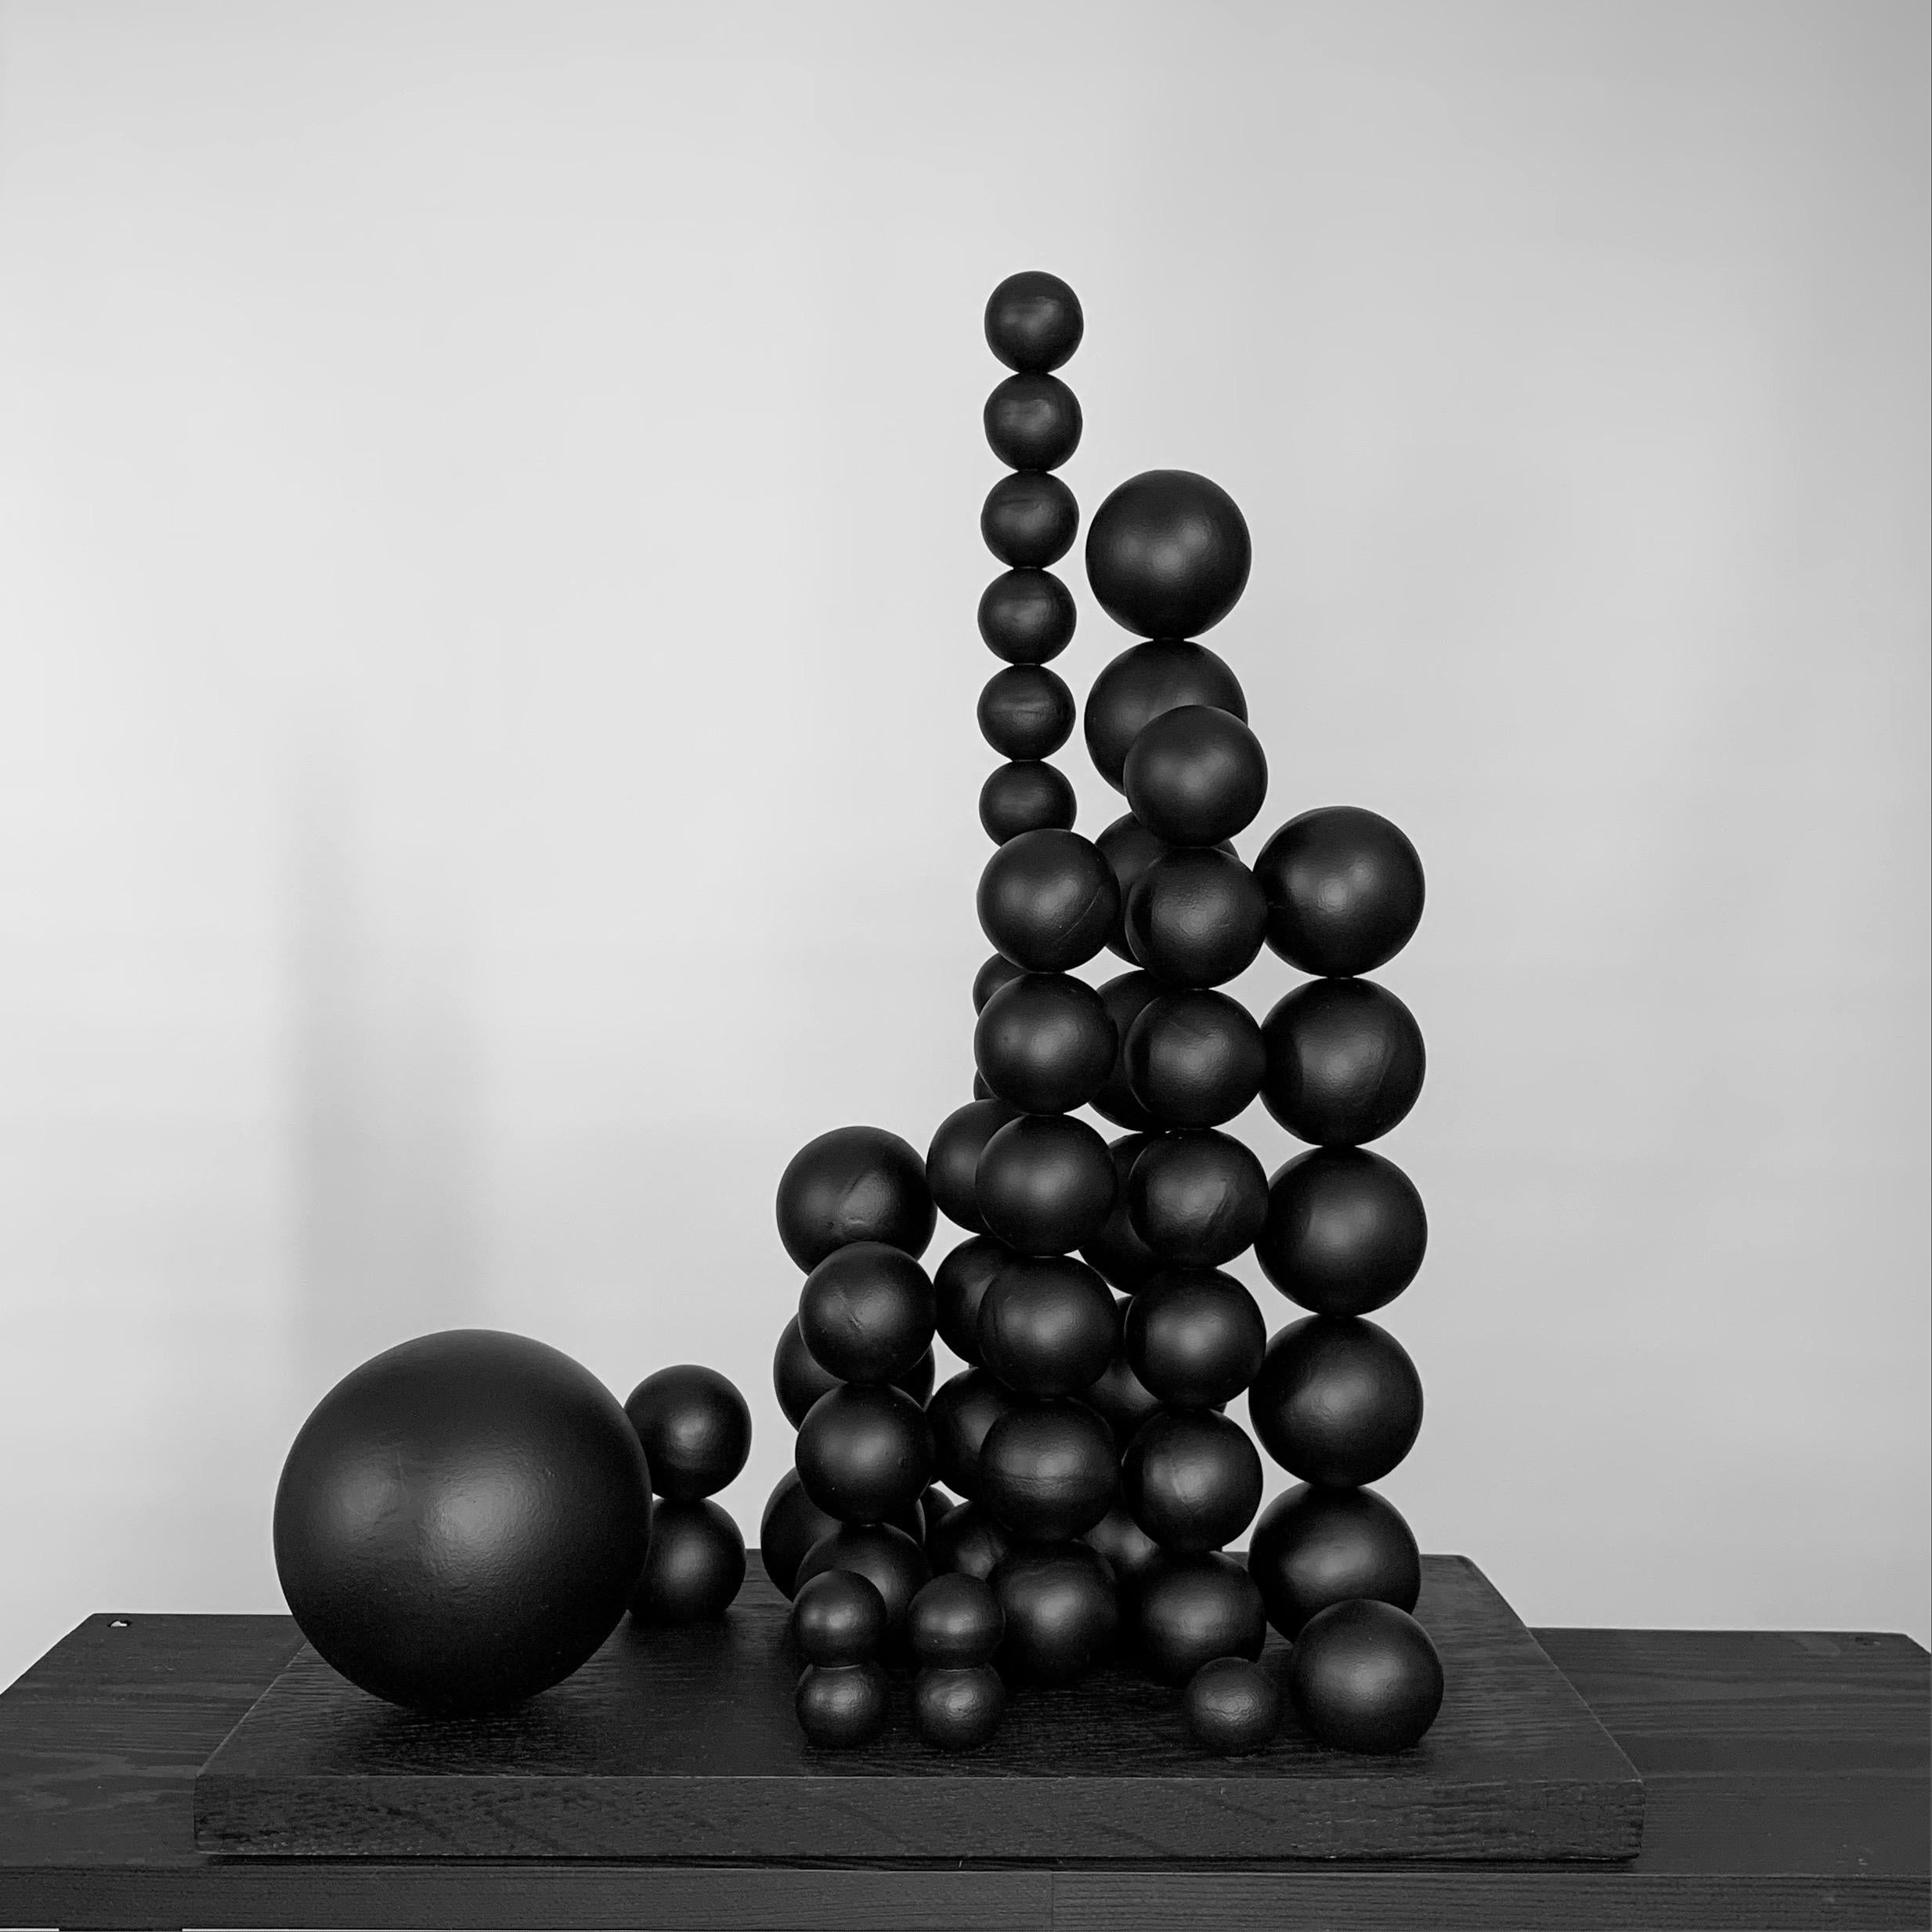 Made in Ukraine, 2020.

Black. Minimalistic. Abstract. Spheres: from molecules to planets. Look around: mono sphere or billions of small combinations of spheres - this all is our world.

Location and delivery from: Made in Ukraine